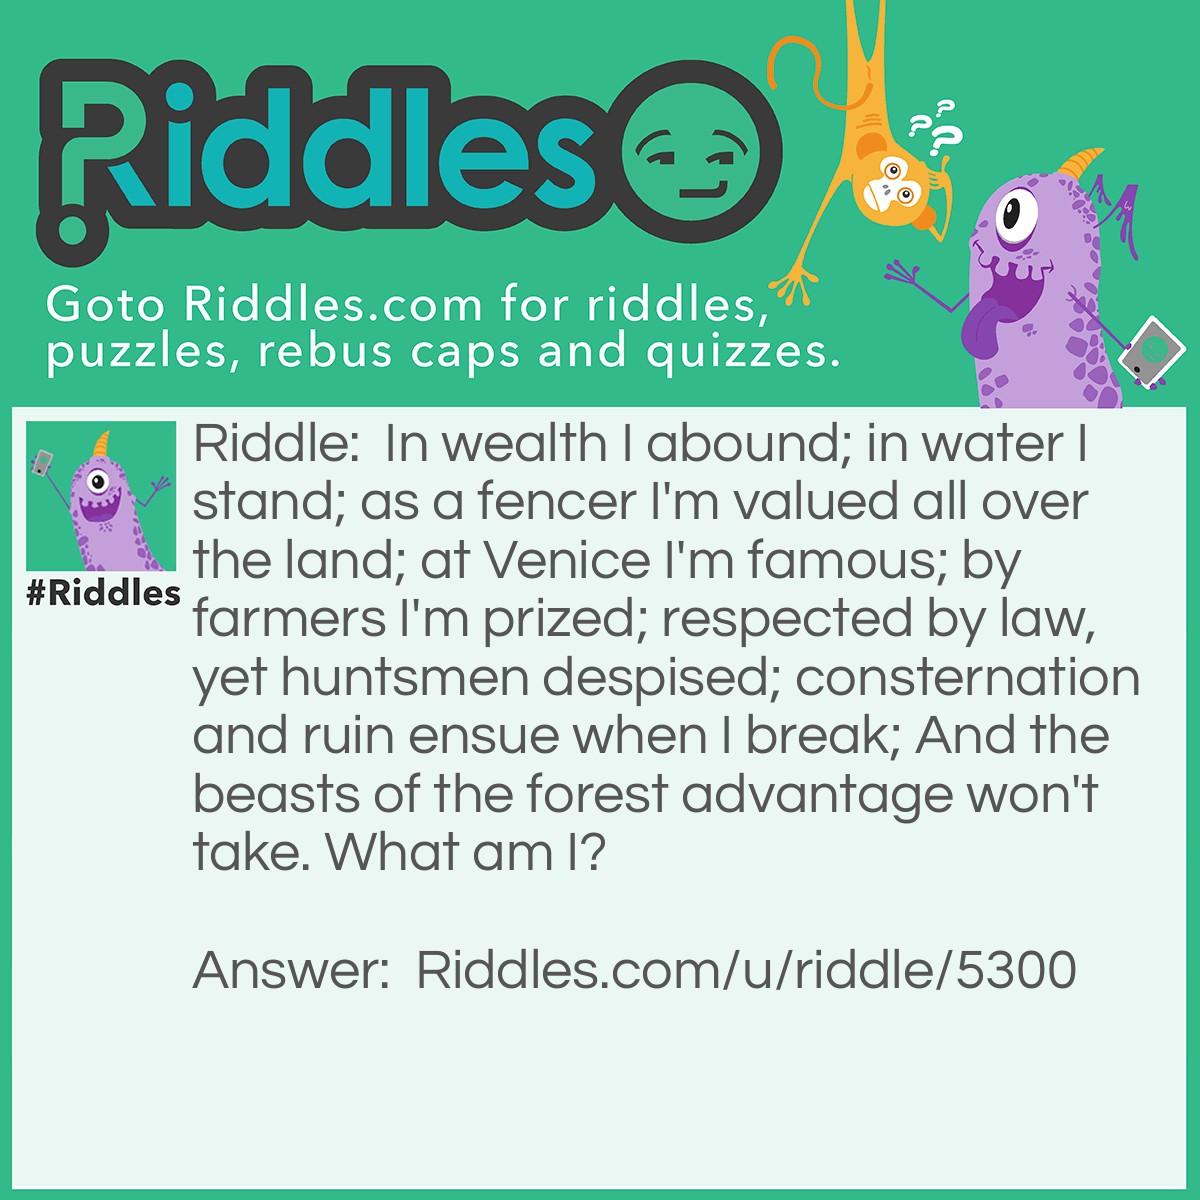 Riddle: In wealth I abound; in water I stand; as a fencer I'm valued all over the land; at Venice I'm famous; by farmers I'm prized; respected by law, yet huntsmen despised; consternation and ruin ensue when I break; And the beasts of the forest advantage won't take. What am I? Answer: I'm a bank.